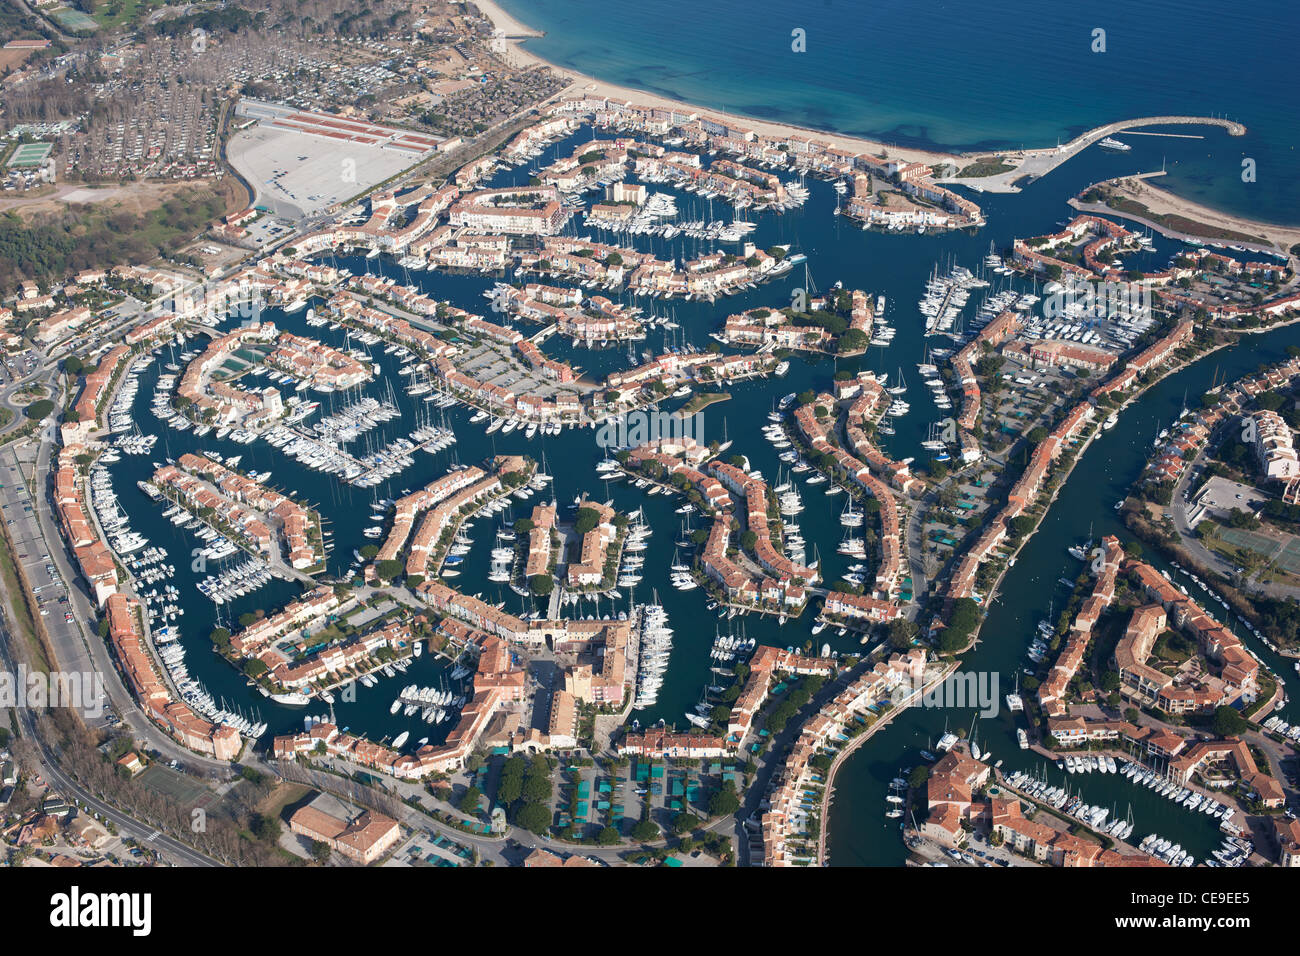 https://c8.alamy.com/comp/CE9EE5/aerial-view-the-seaside-town-of-port-grimaud-created-in-the-60s-on-CE9EE5.jpg